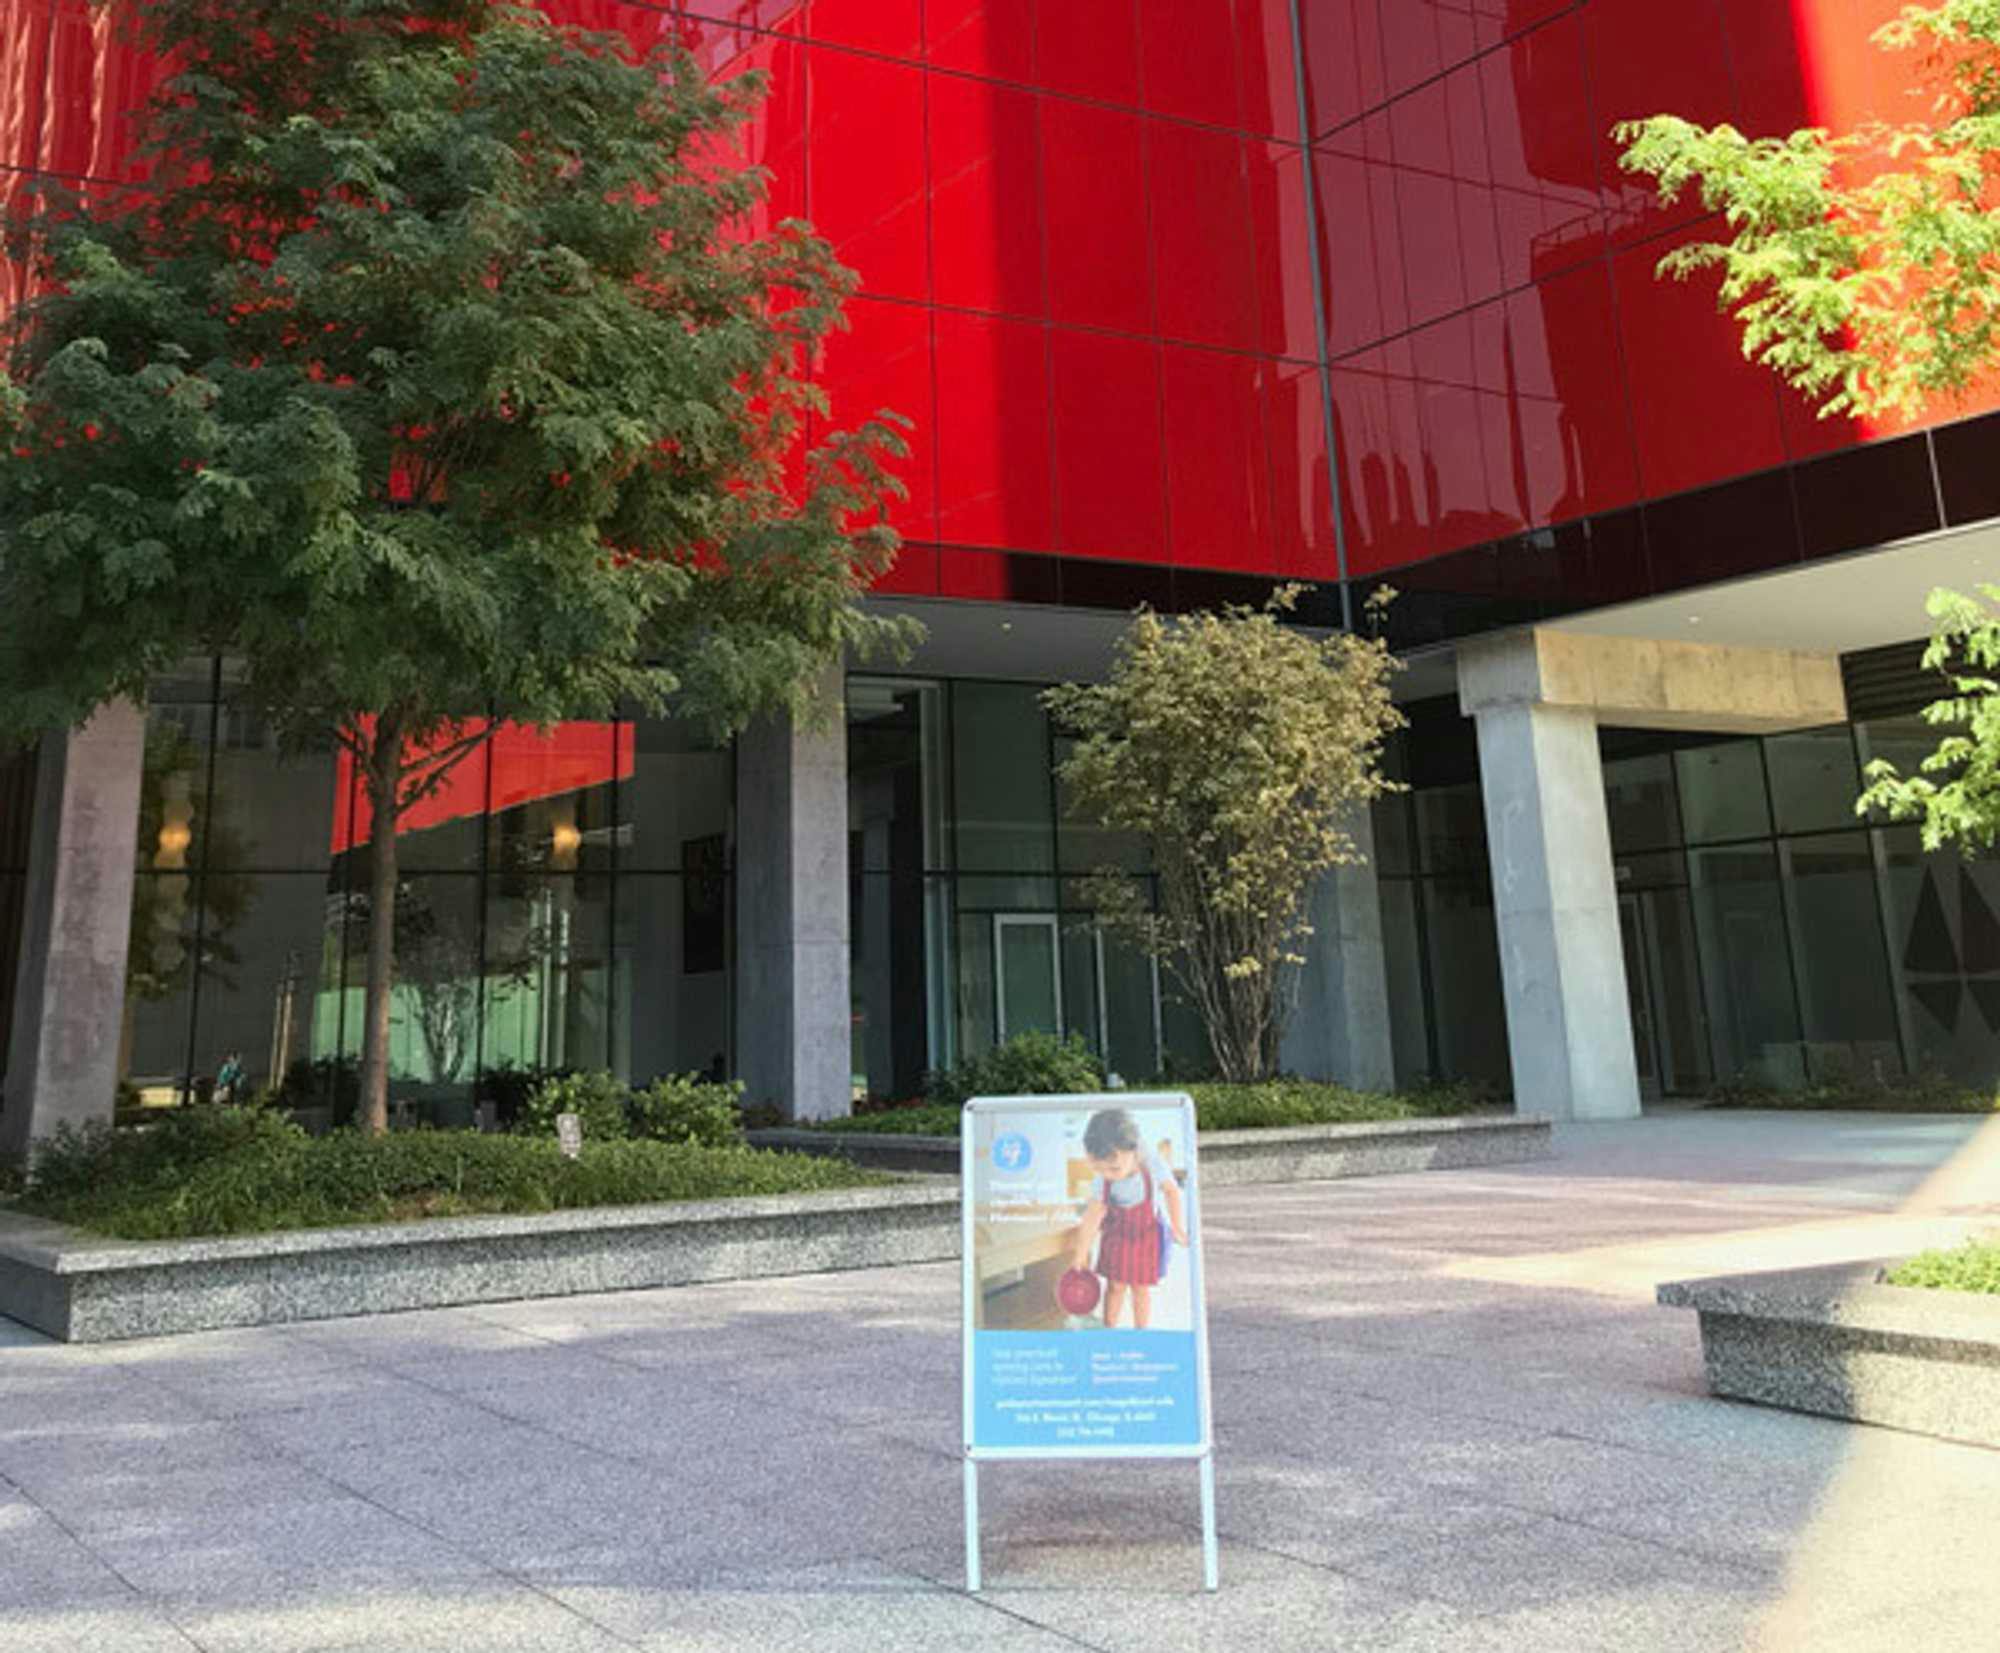 View of Guidepost Montessori at Magnificent Mile showing the towering red skyscraper with trees out front and a branded Guidepost Montessori A-frame sign